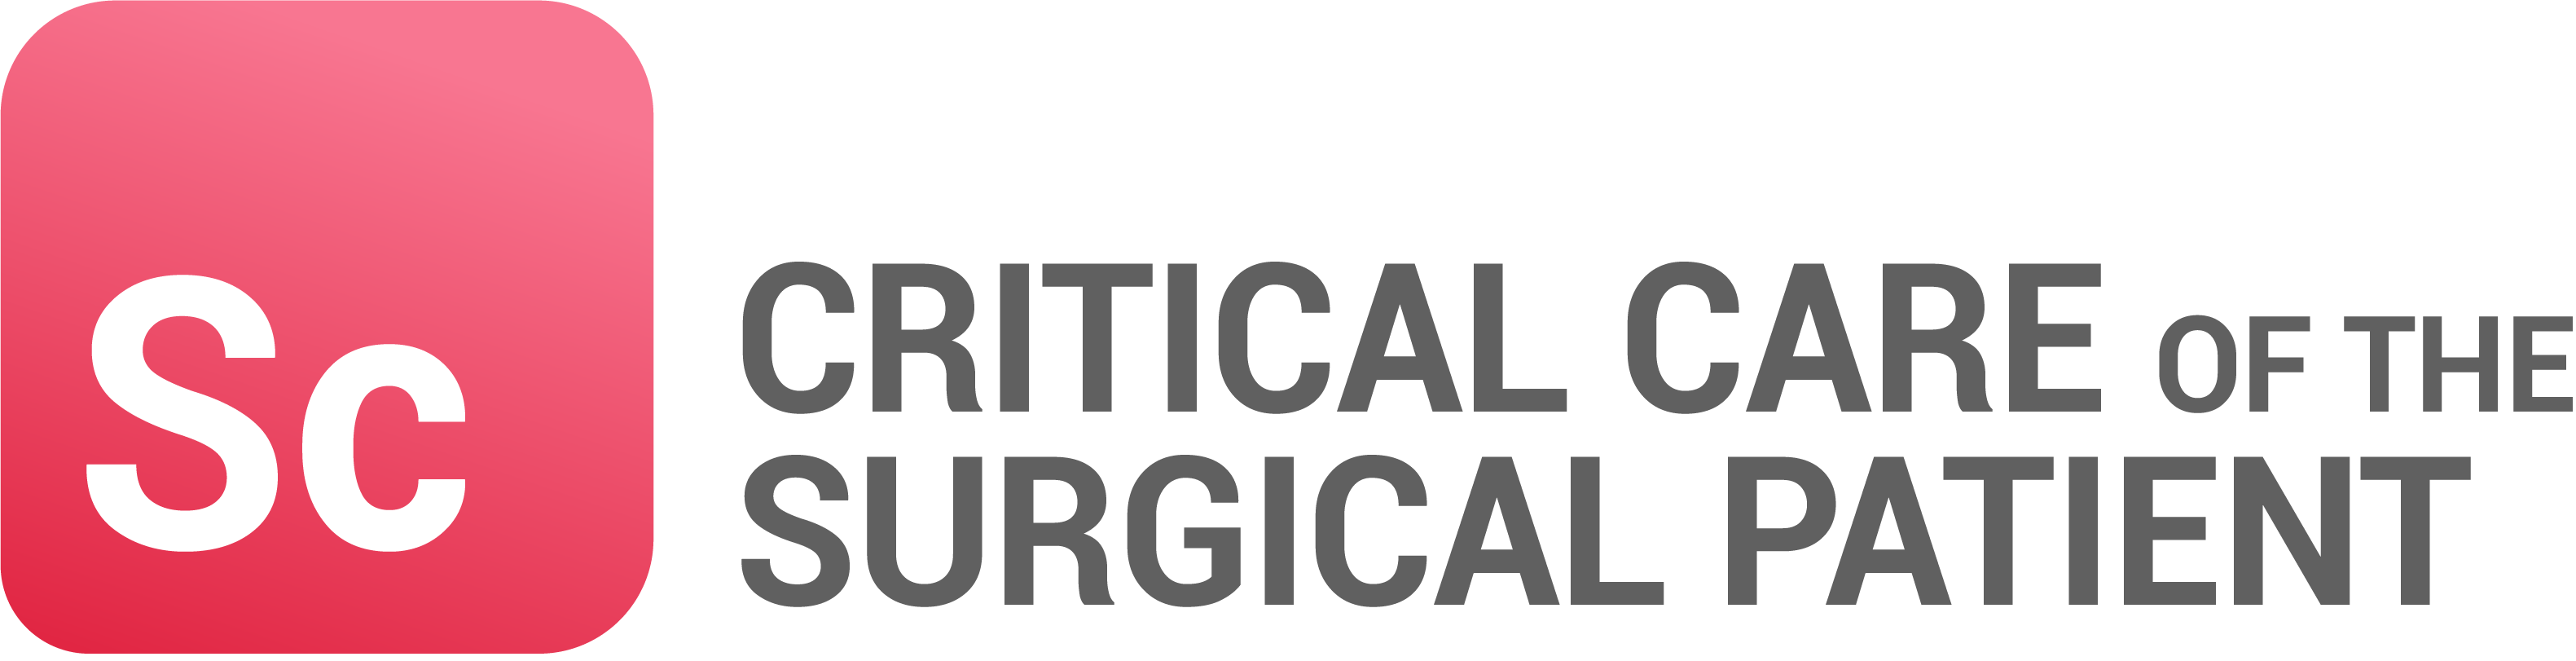 Critical Care of the Surgical Patient Image